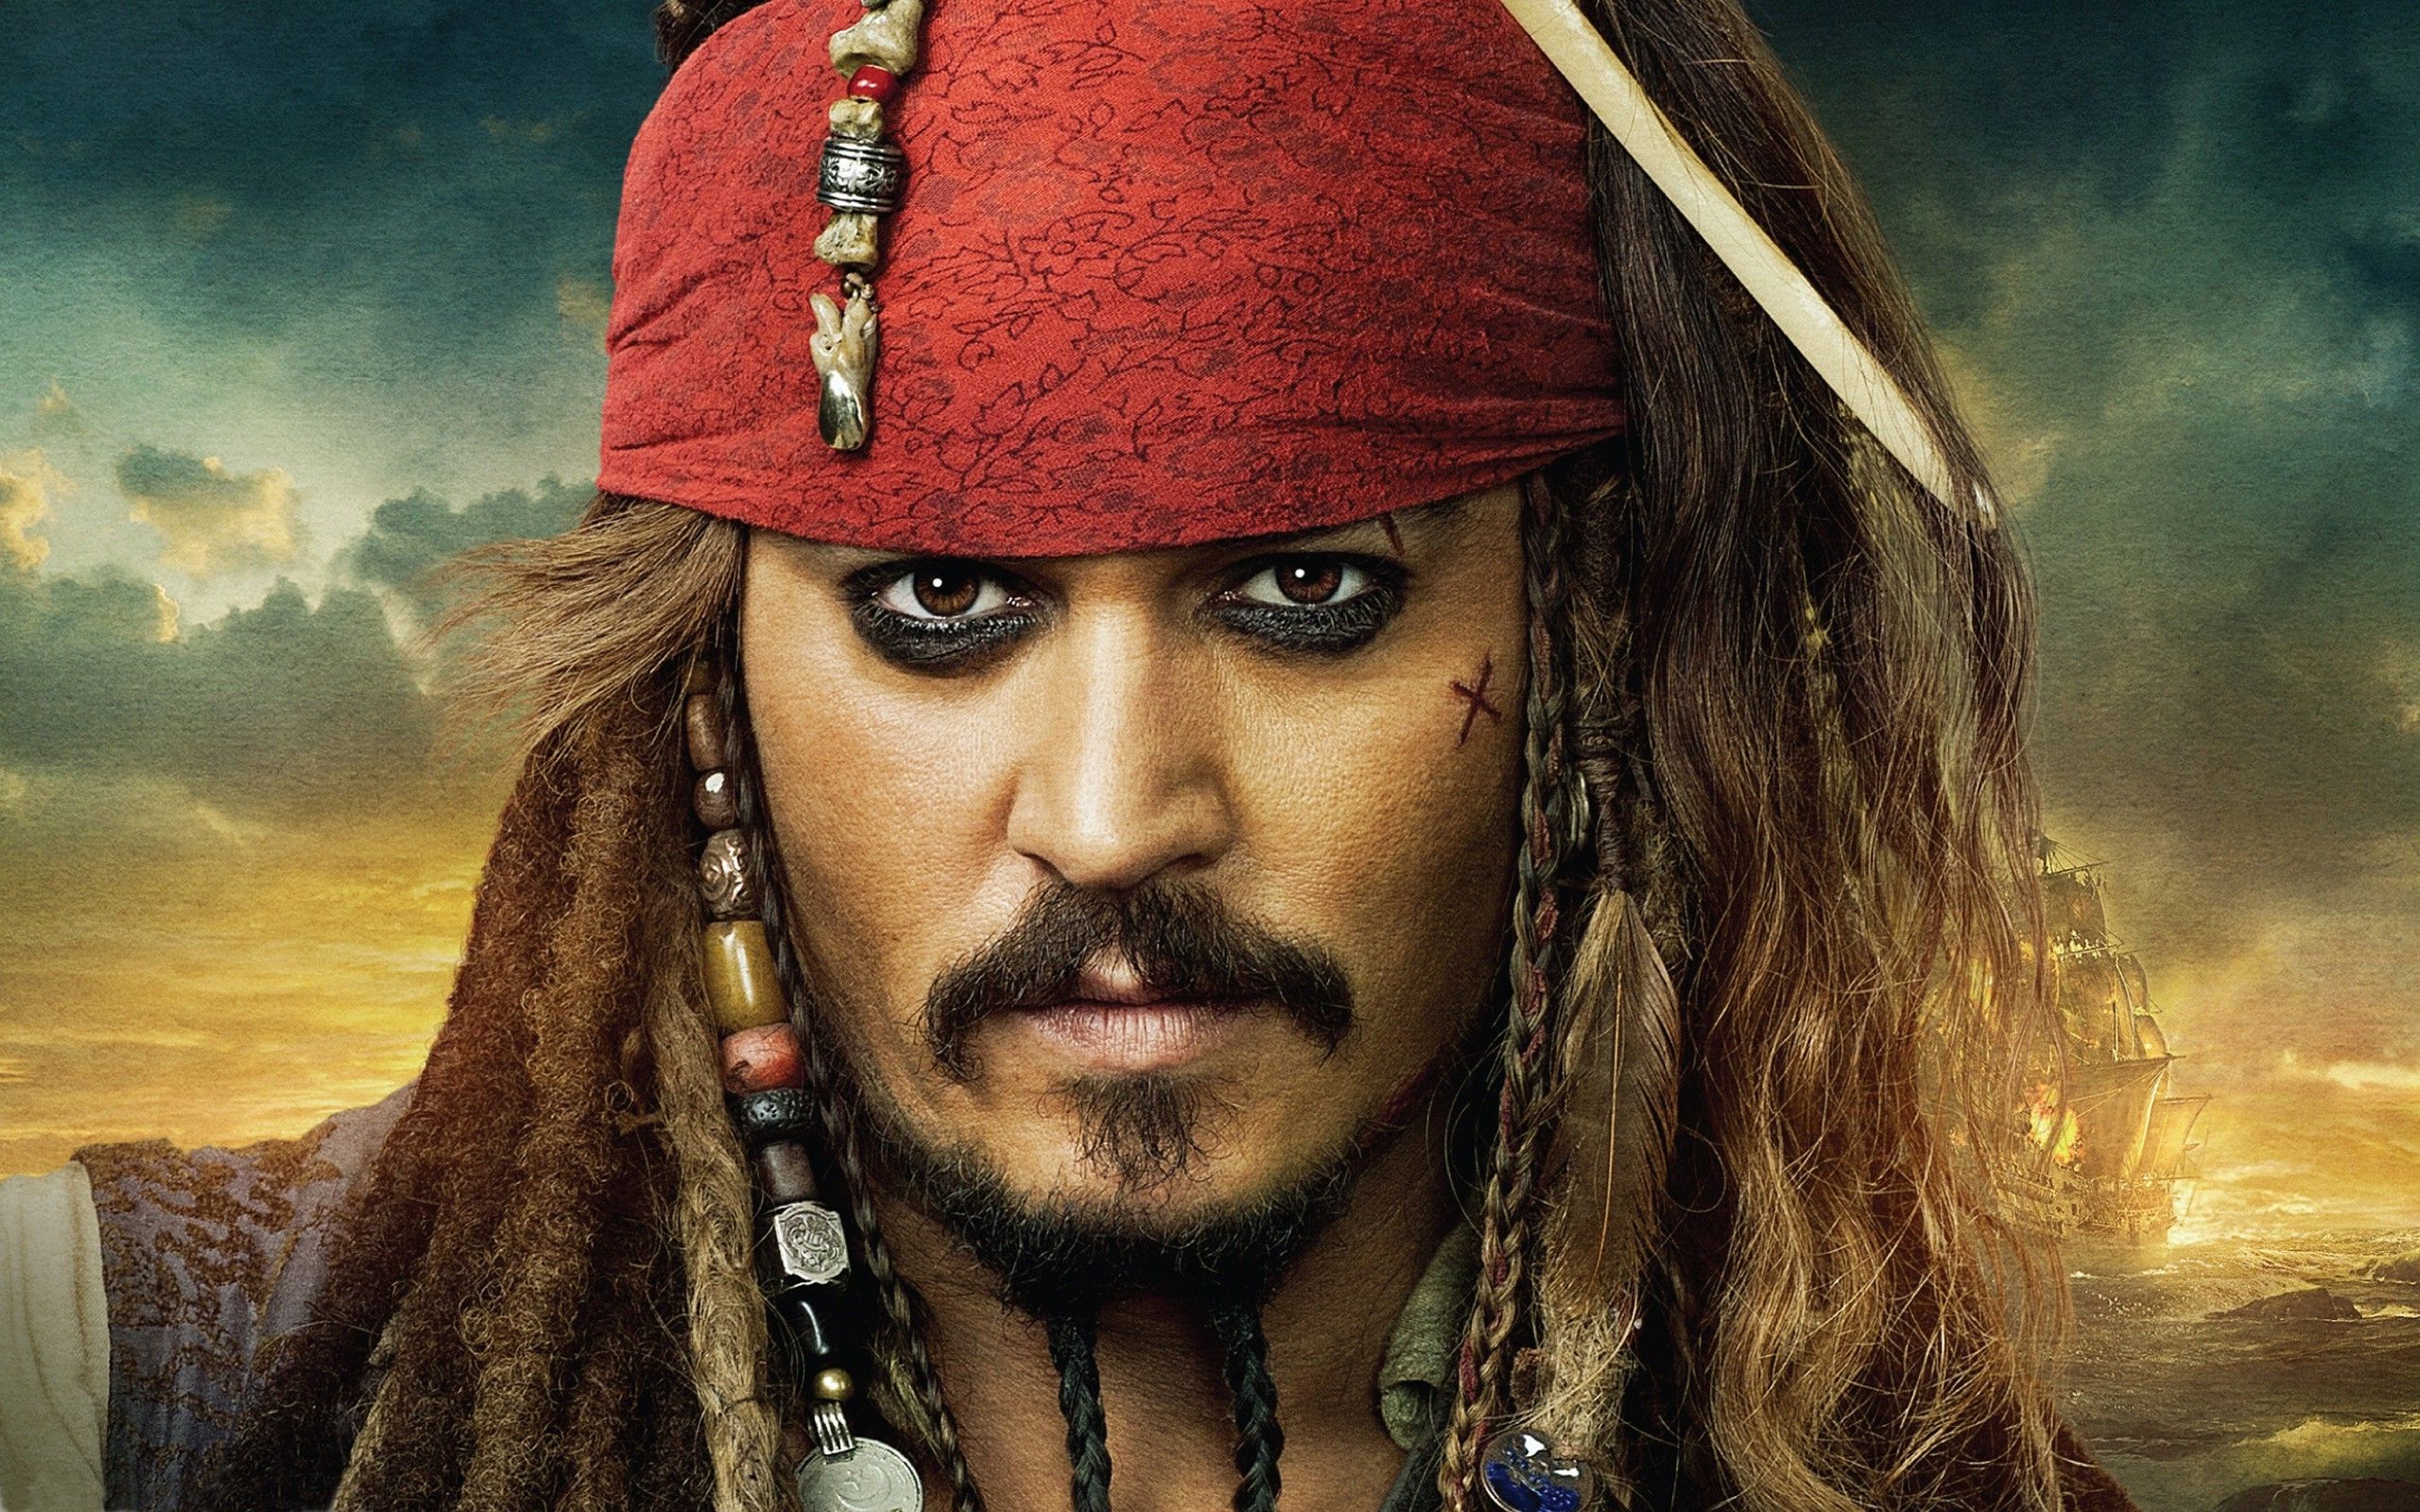 Johnny Depp's Jack Sparrow Retired From The 'Pirates Of The Caribbean' Franchise